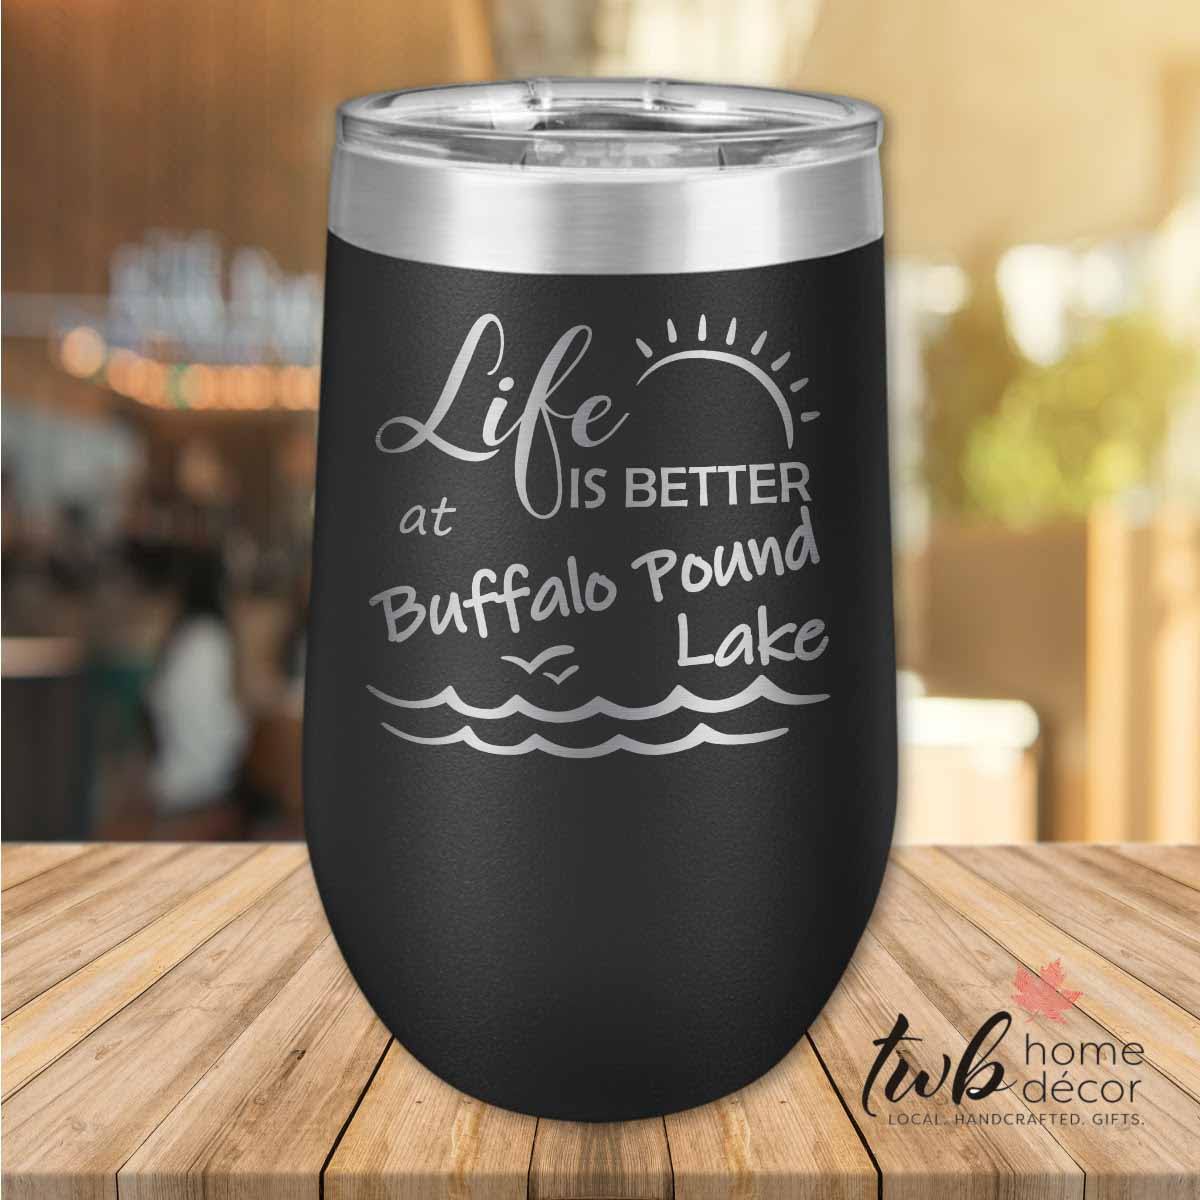 Life is Better at Buffalo Pound Lake Thermal - TWB Home Decor